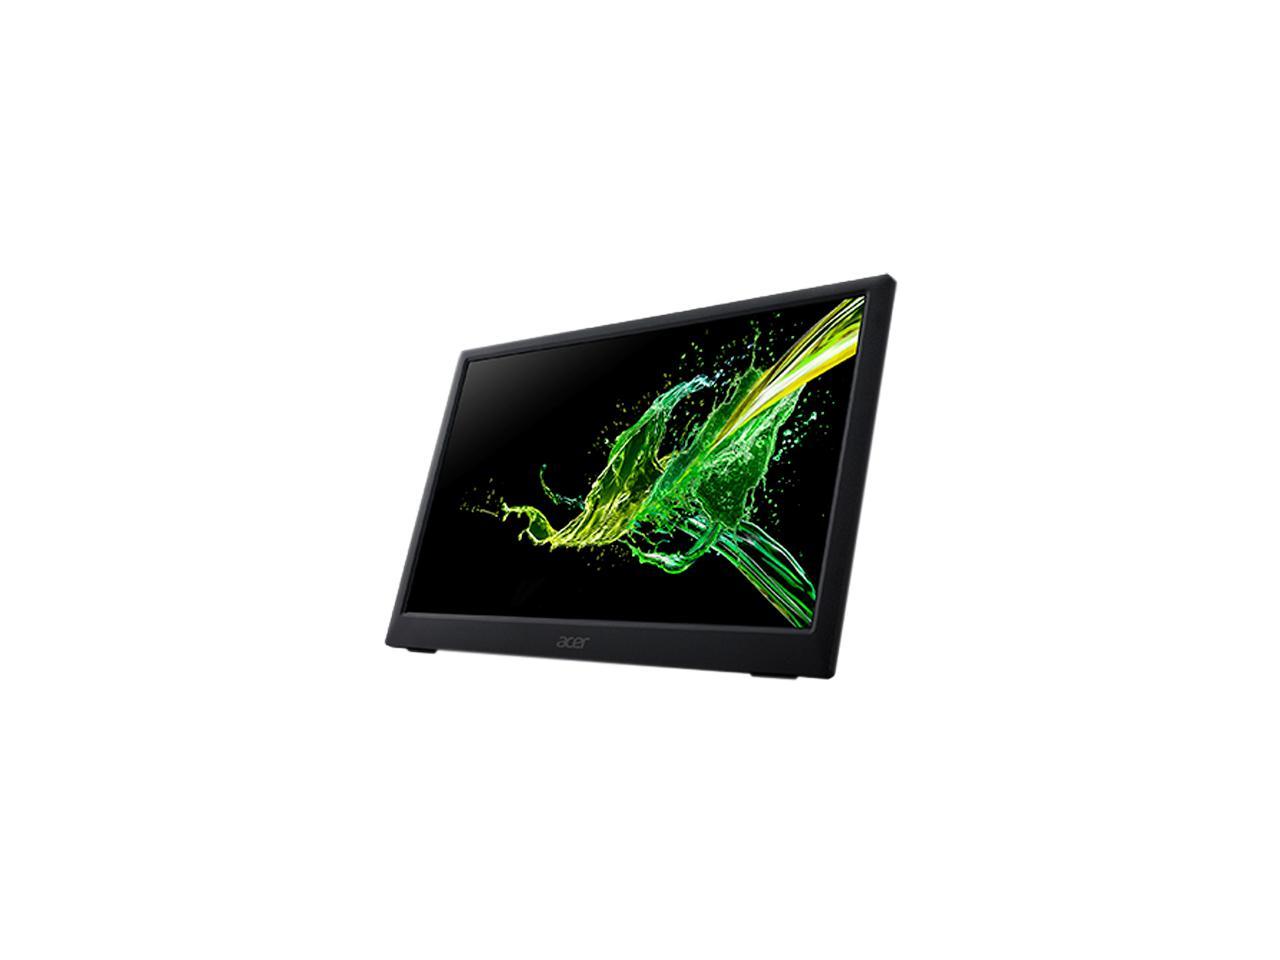 Acer PM161Q 16" (Actual size 15.6") Full HD 1920 x 1080 USB Type-C LED Backlit IPS Portable Monitor